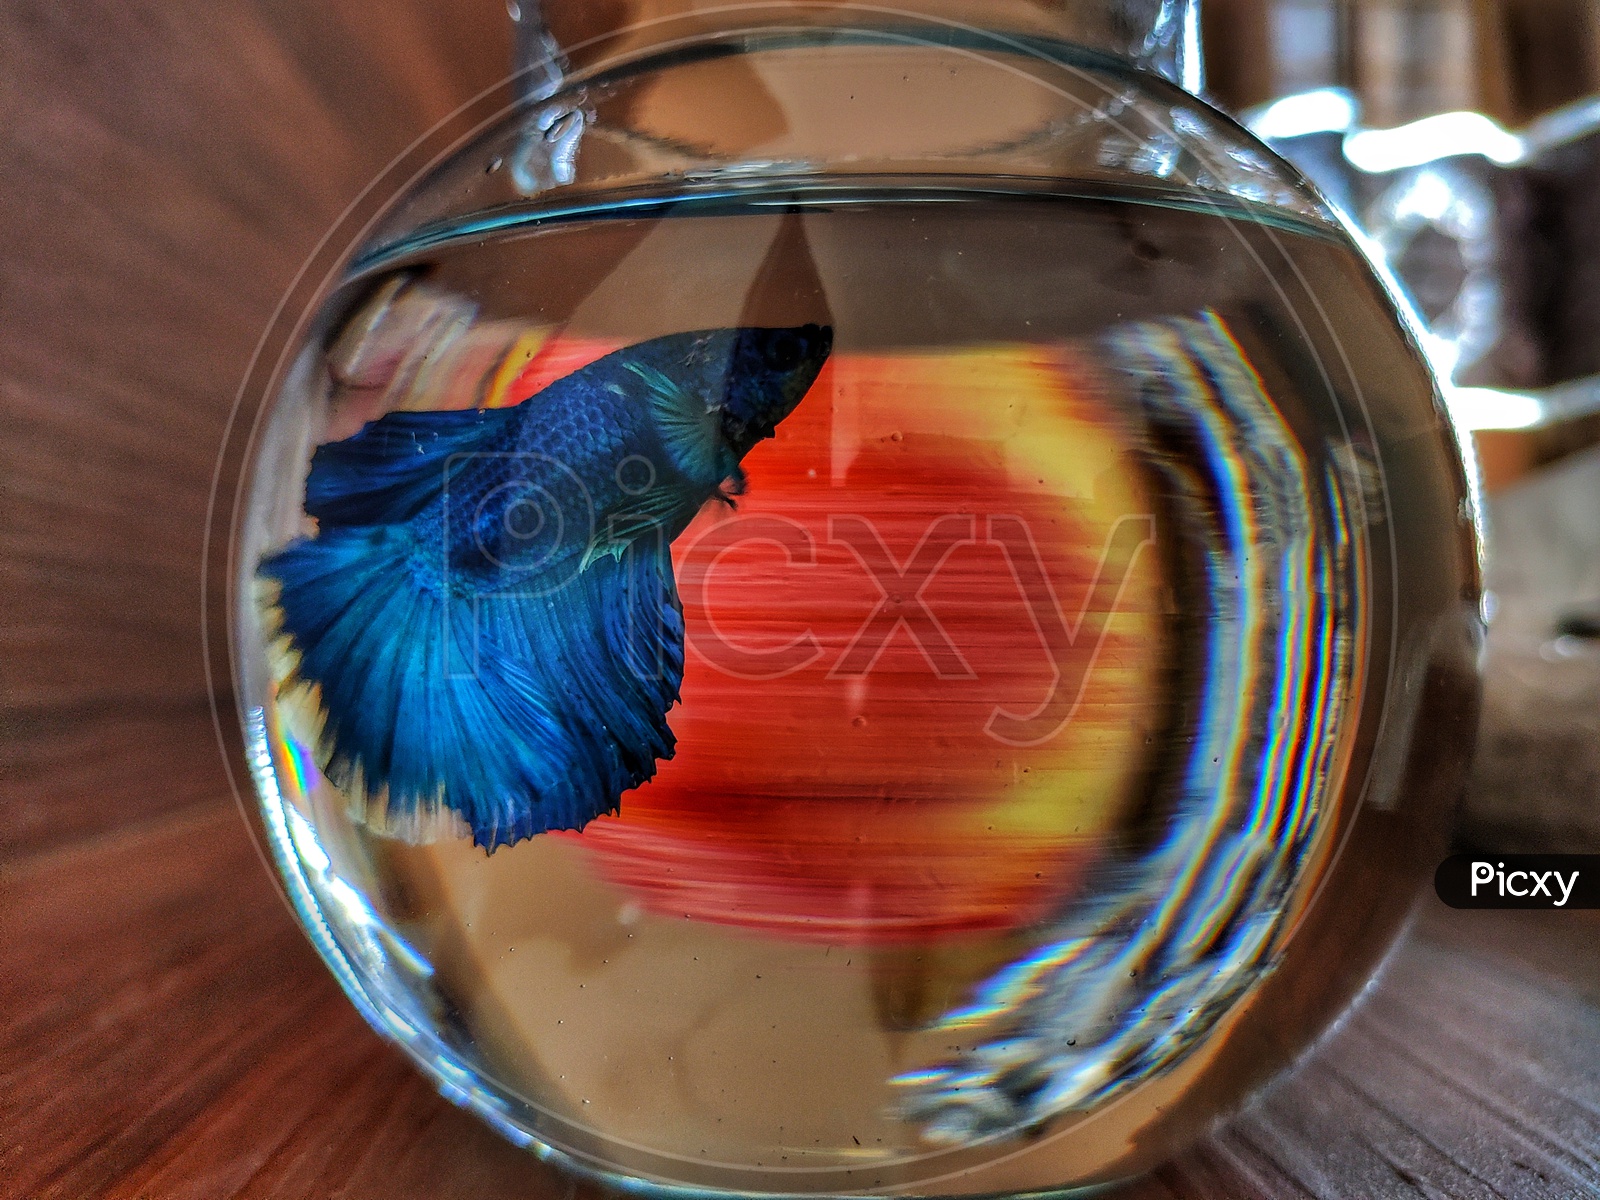 This is a little blue betta fish named Blu in a small aquarium placed on a table.